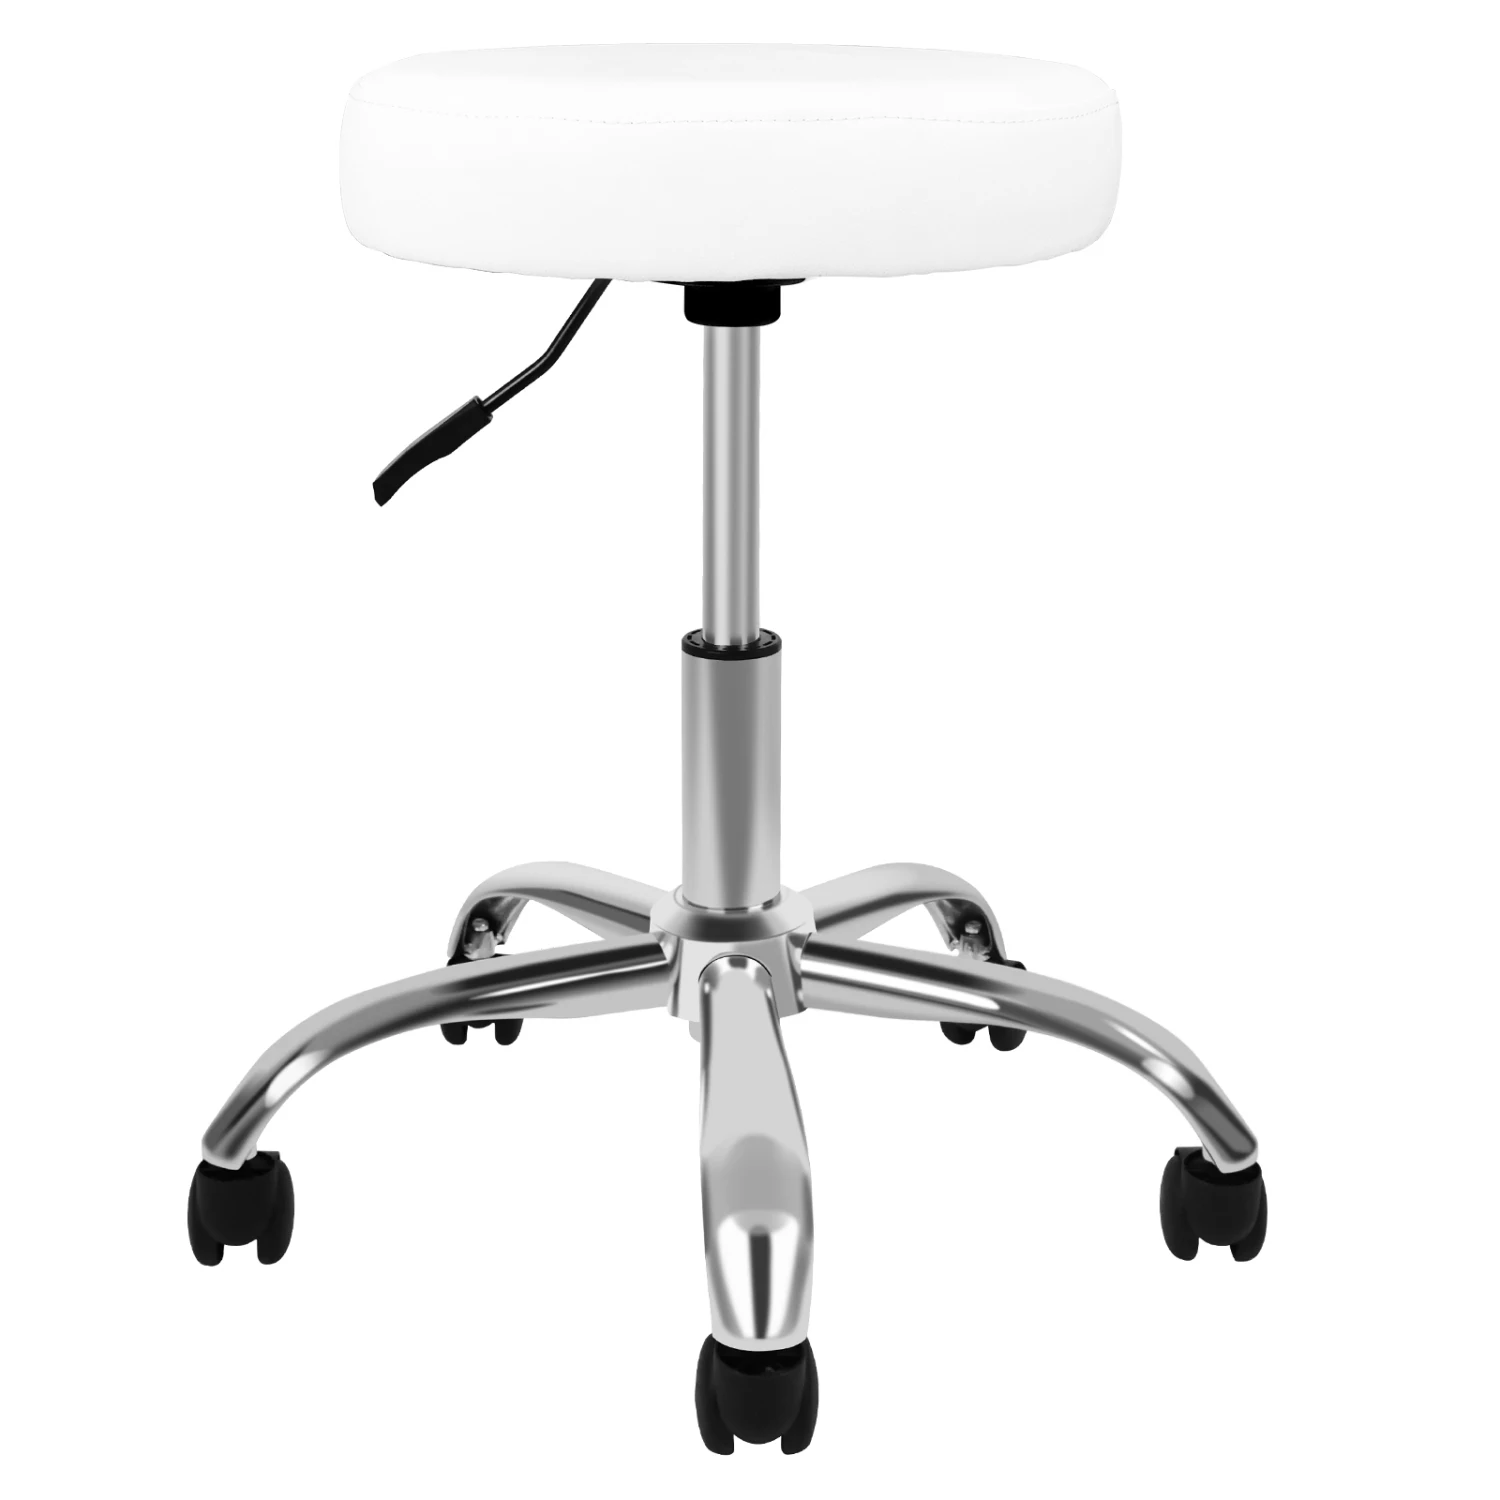 

Height Adjustable White YSSOA Round Stool Chair with Wheels, Ergonomic Portable Seating for Office, Home or Salon Use, Stylish a